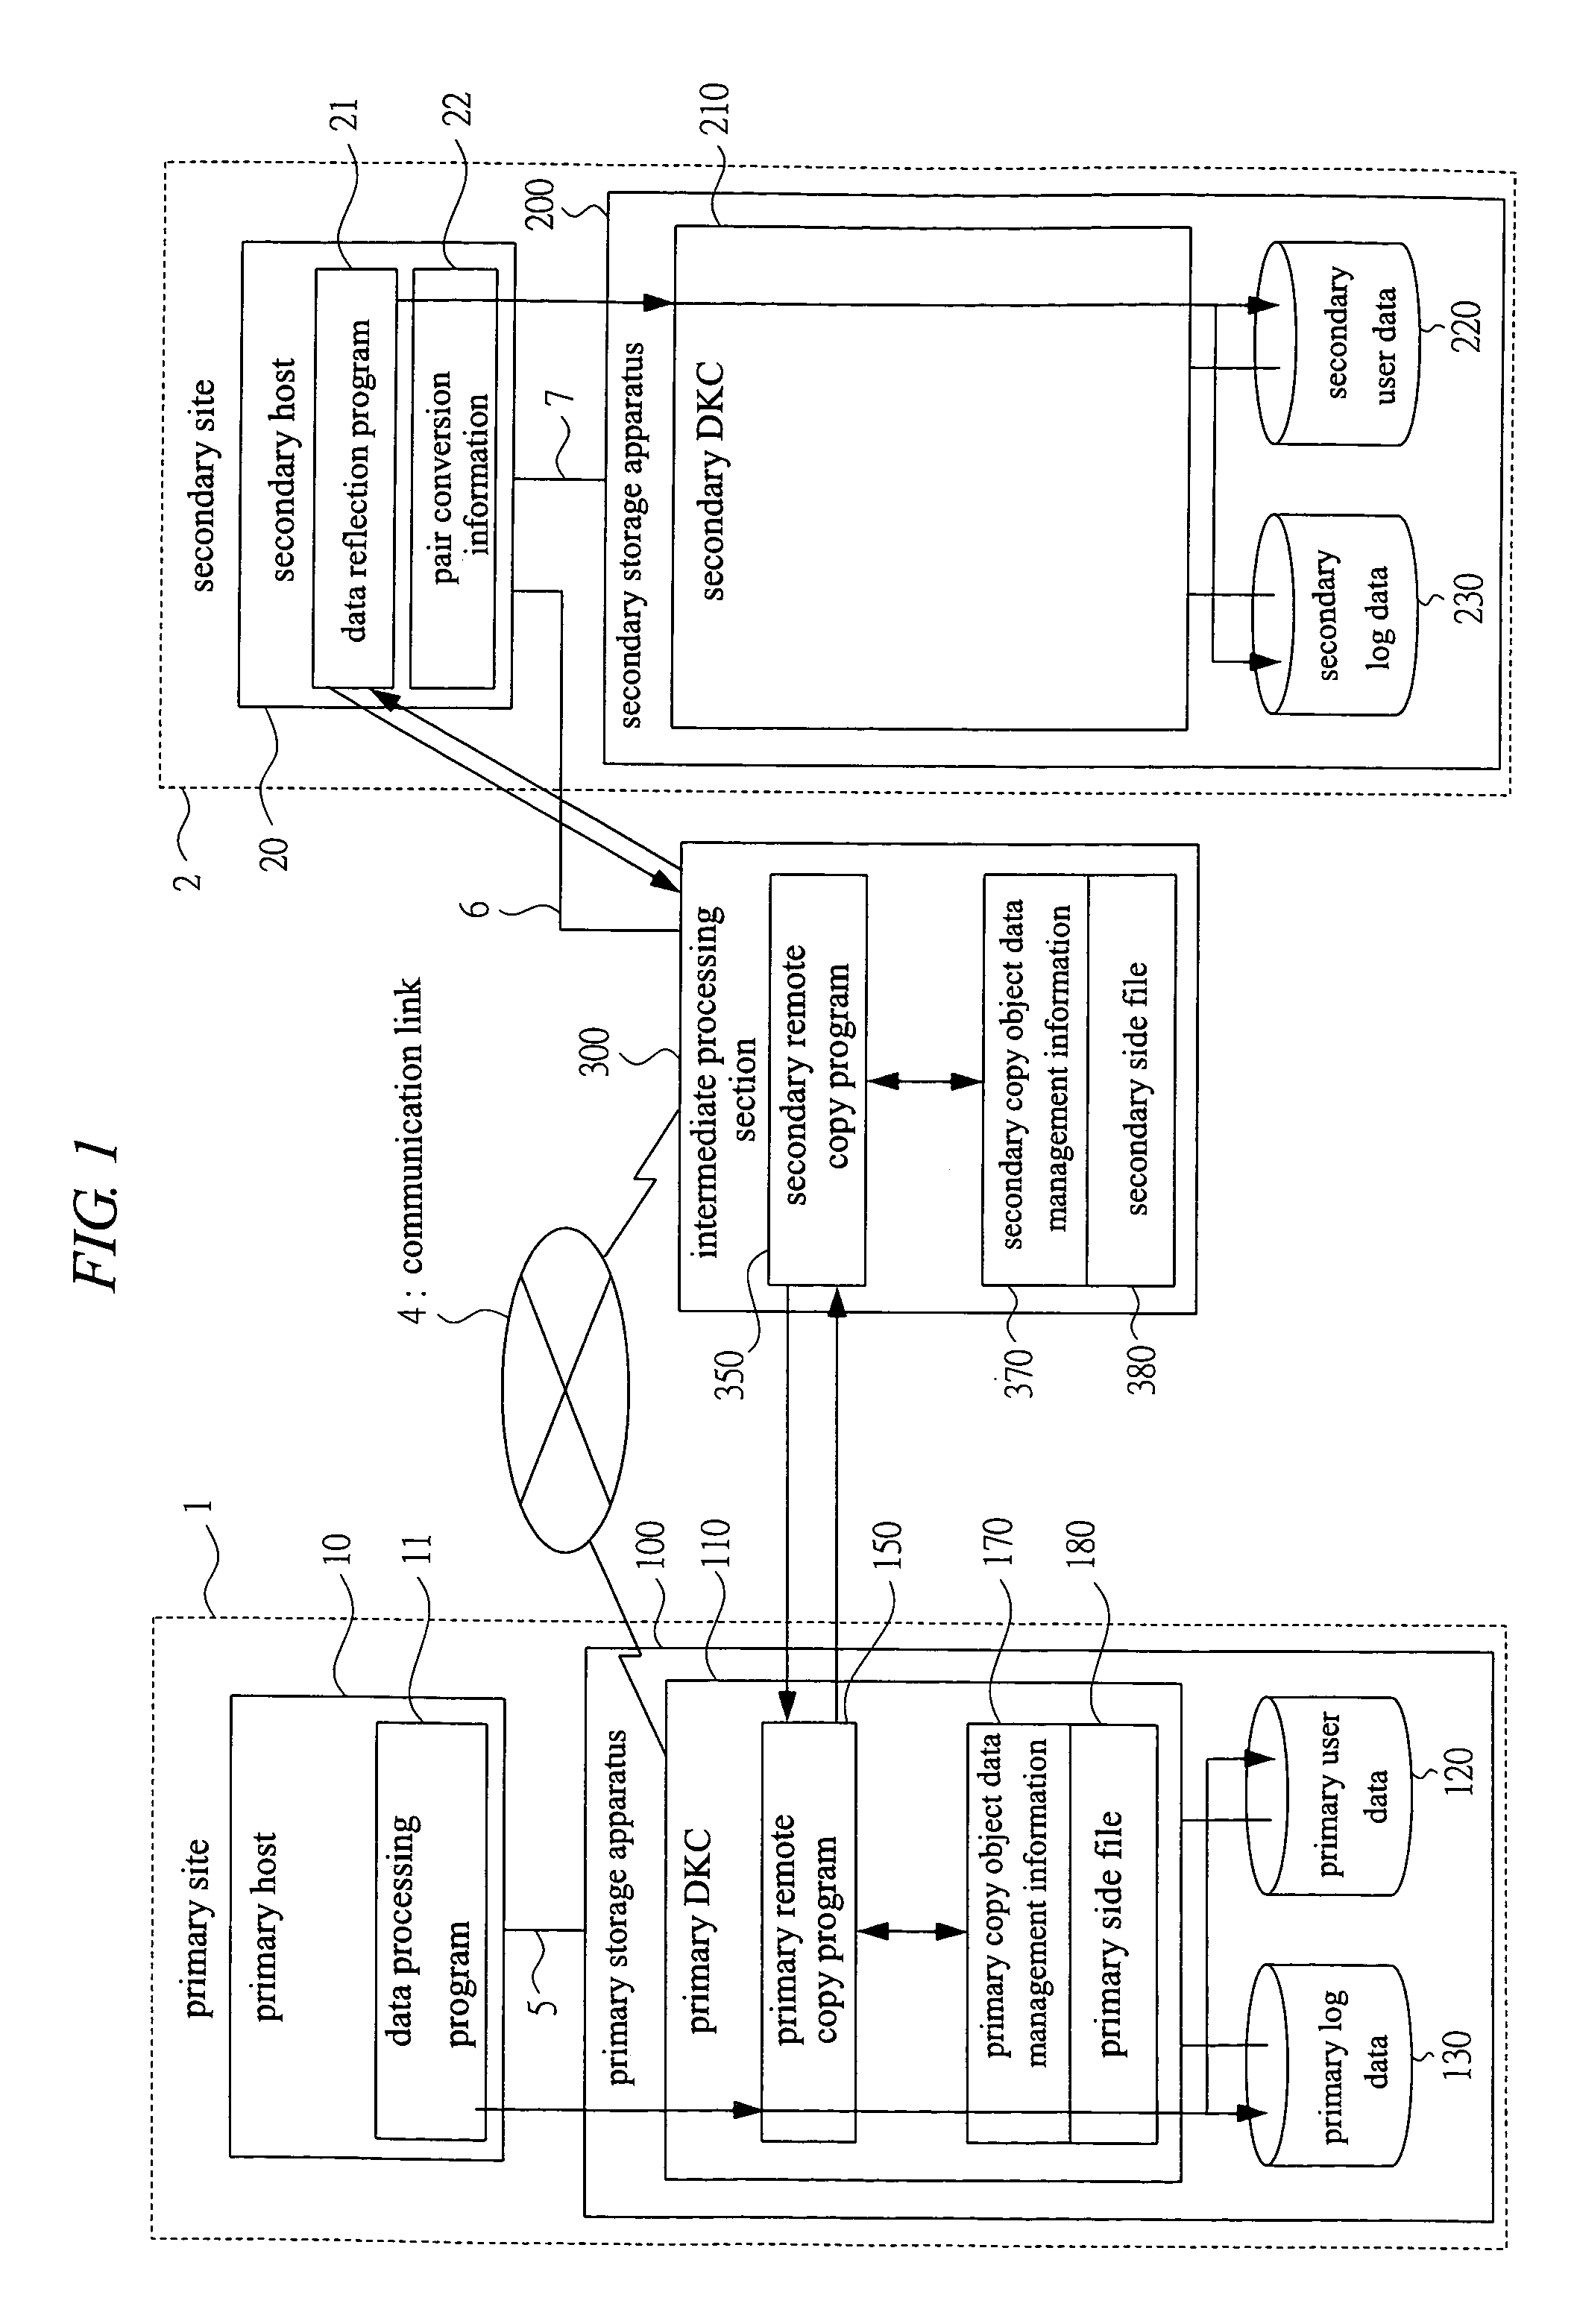 Data processing system